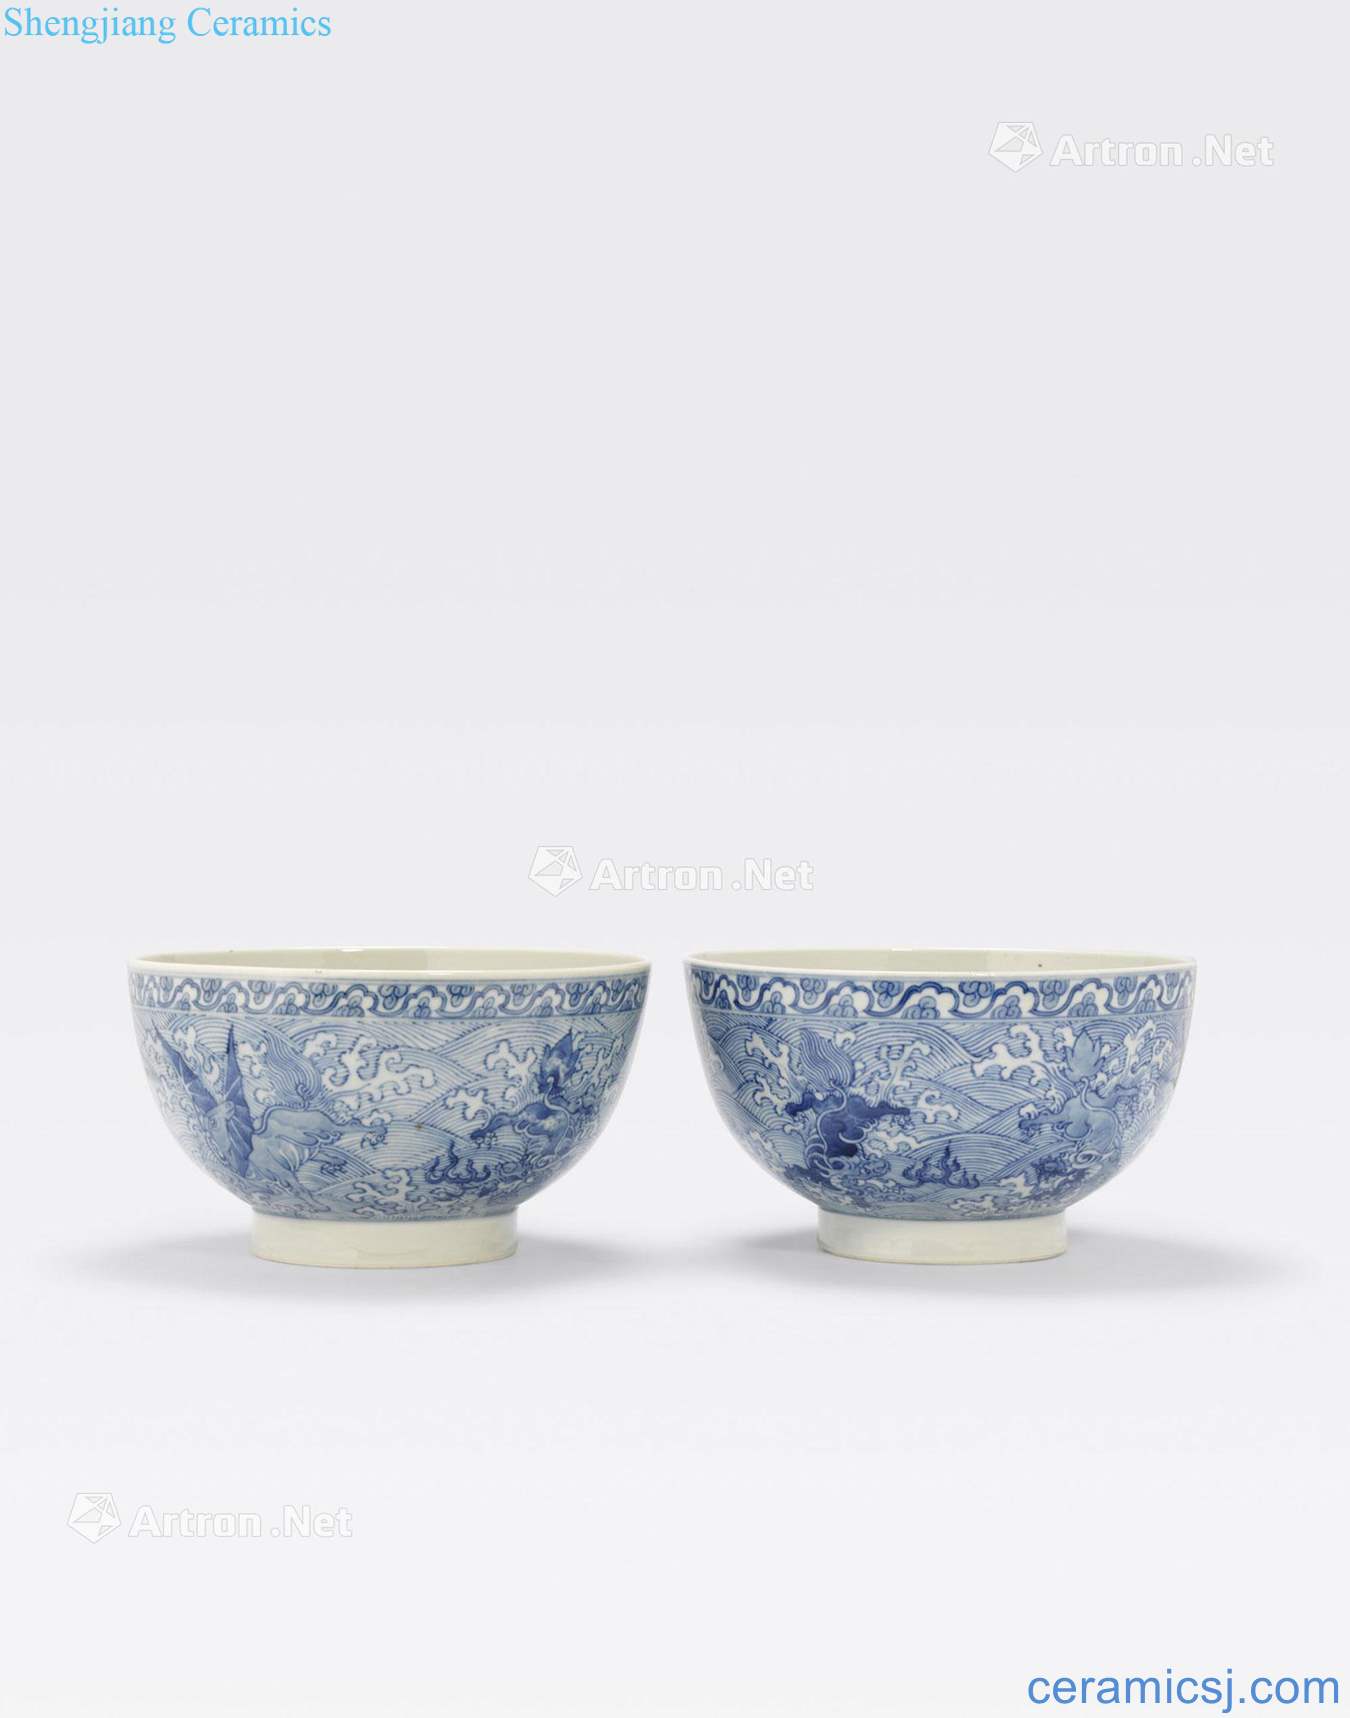 Wanli marks, Kangxi period A PAIR OF BLUE AND WHITE BOWLS DECORATED WITH MYTHICAL BEASTS